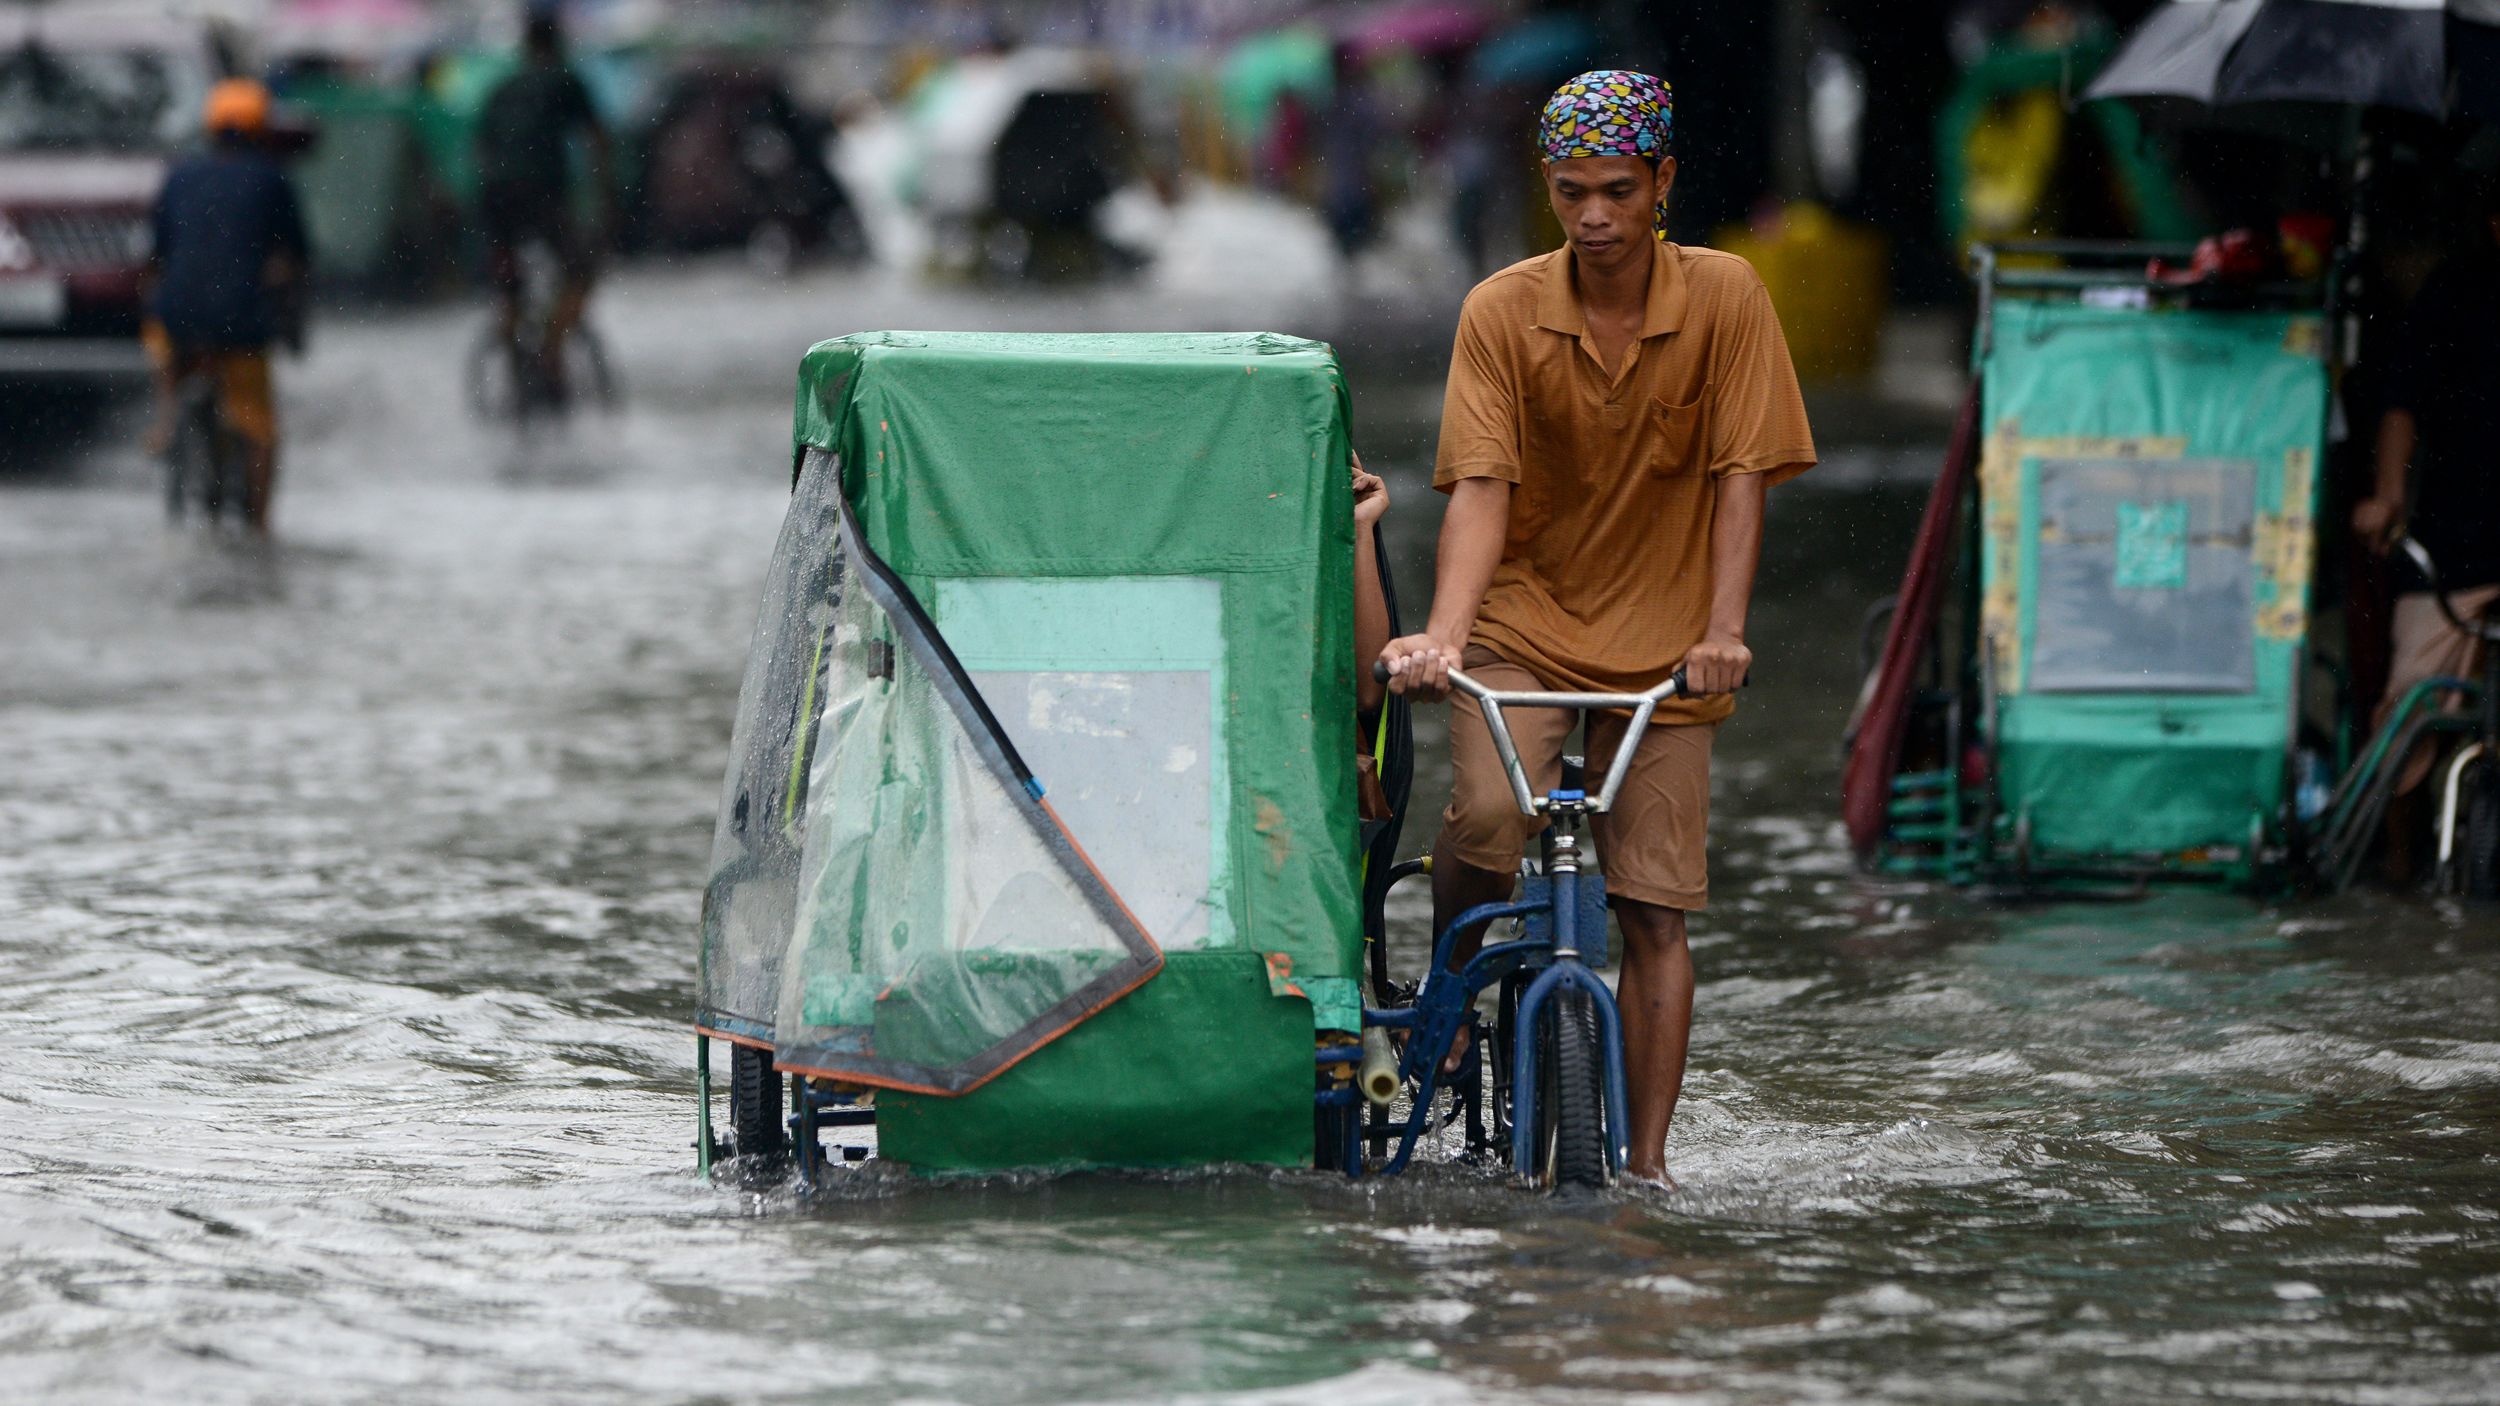 A pedicab driver wades through a flooded street in Manila on Monday.